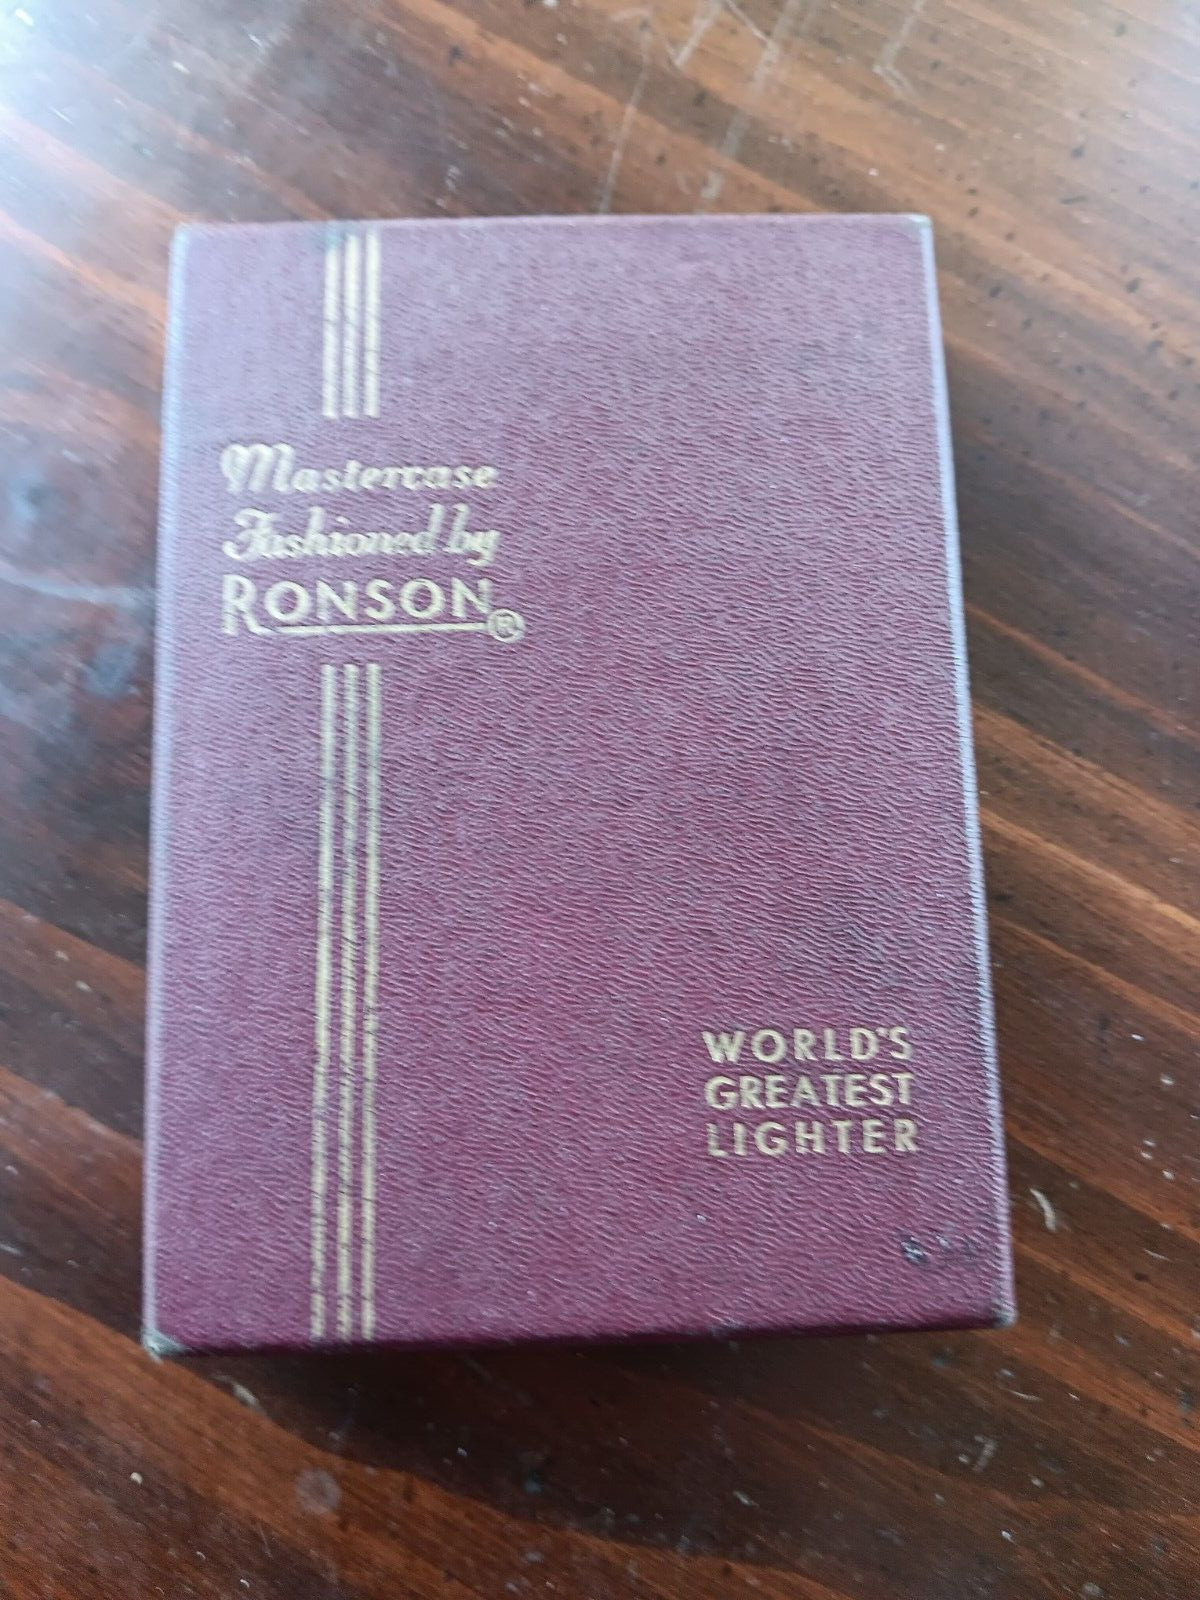 Mastercase Ronson King Fashioned Combination Cigarette Case And Lighter